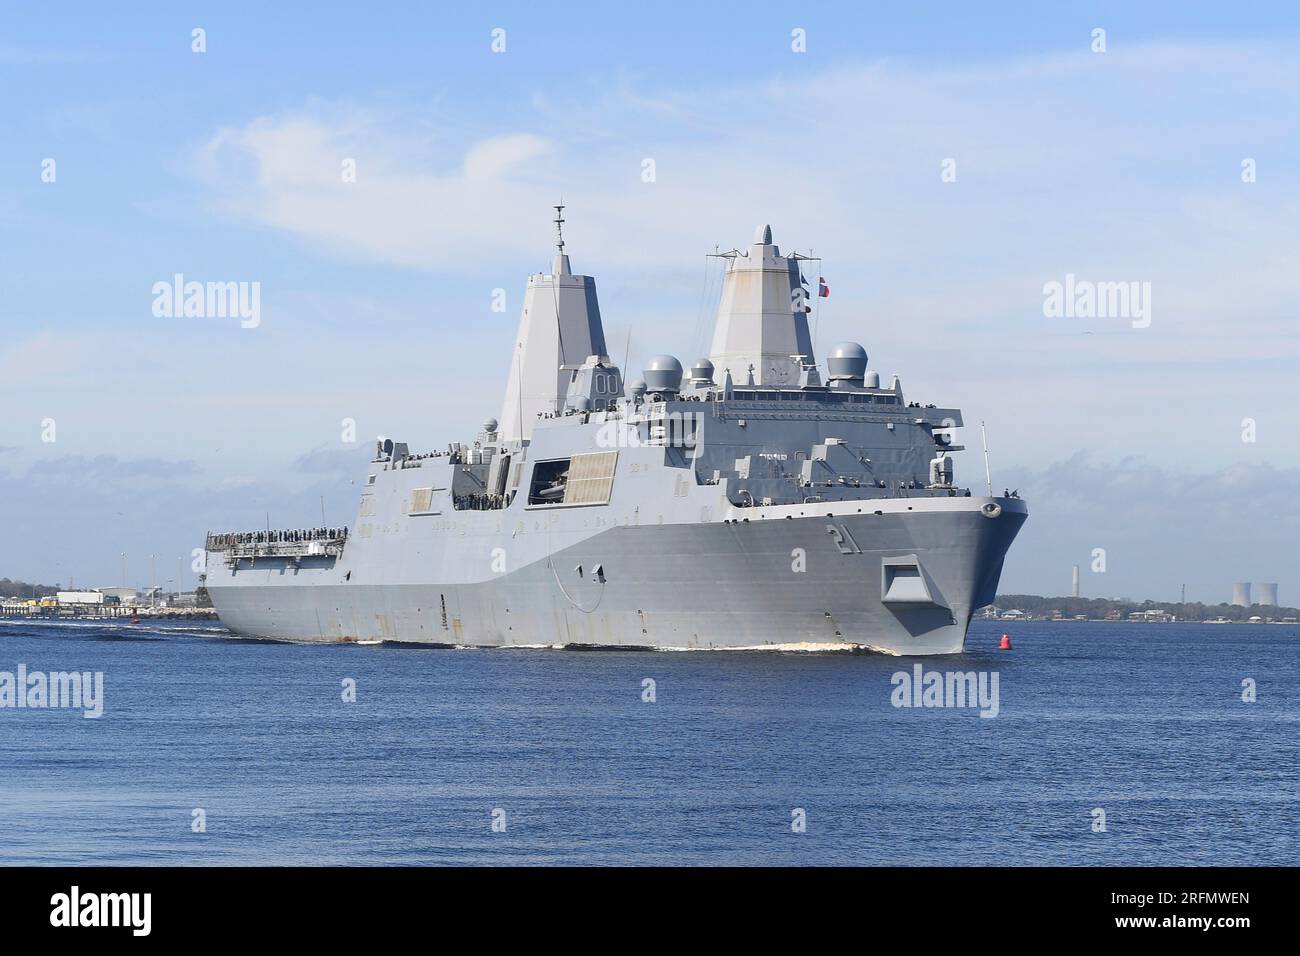 Jacksonville, United States. 07 February, 2018. The U.S. Navy San Antonio-class amphibious transport dock ship USS New York, departs Naval Station Mayport for a scheduled six-month deployment, February 7, 2018 in Jacksonville, Florida. Credit: MC2 Mark Andrew Hays/US Navy/Alamy Live News Stock Photo